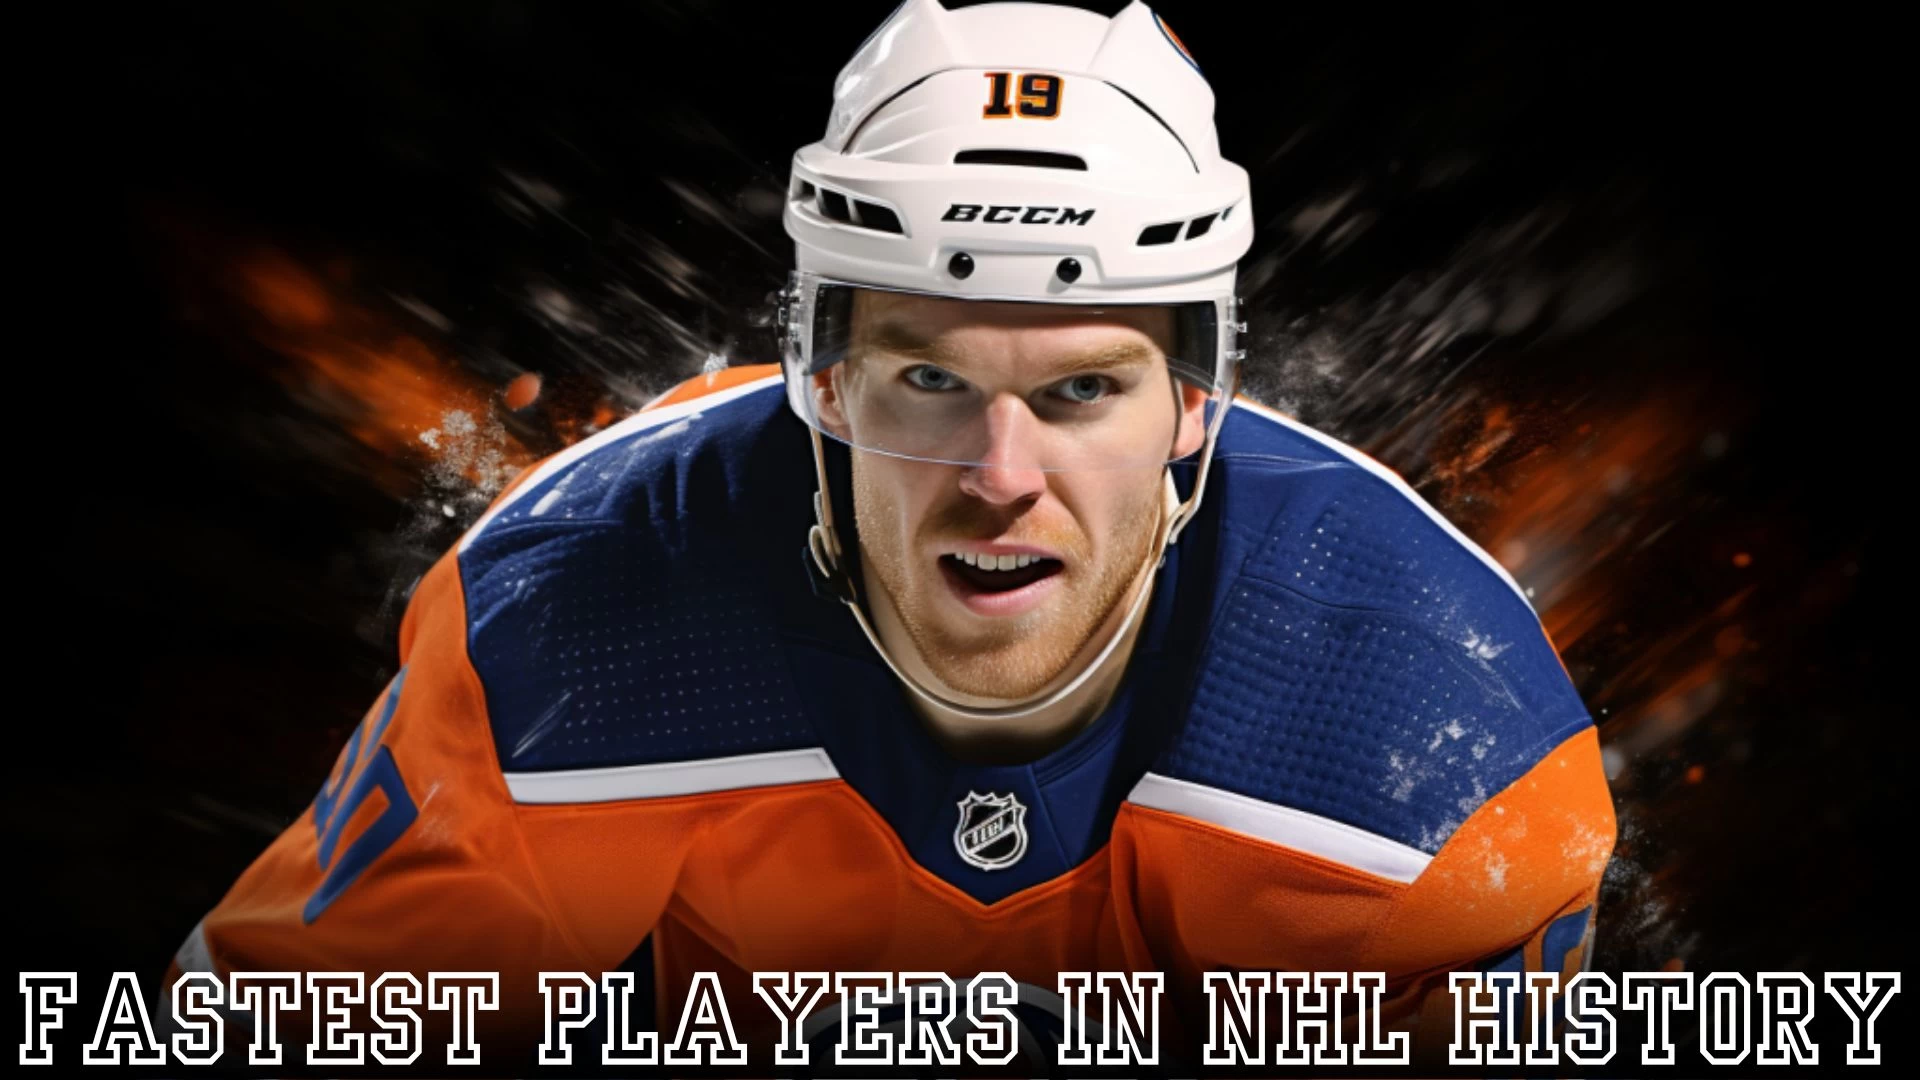 Fastest Players in NHL History - Top 10 Blazing Trails